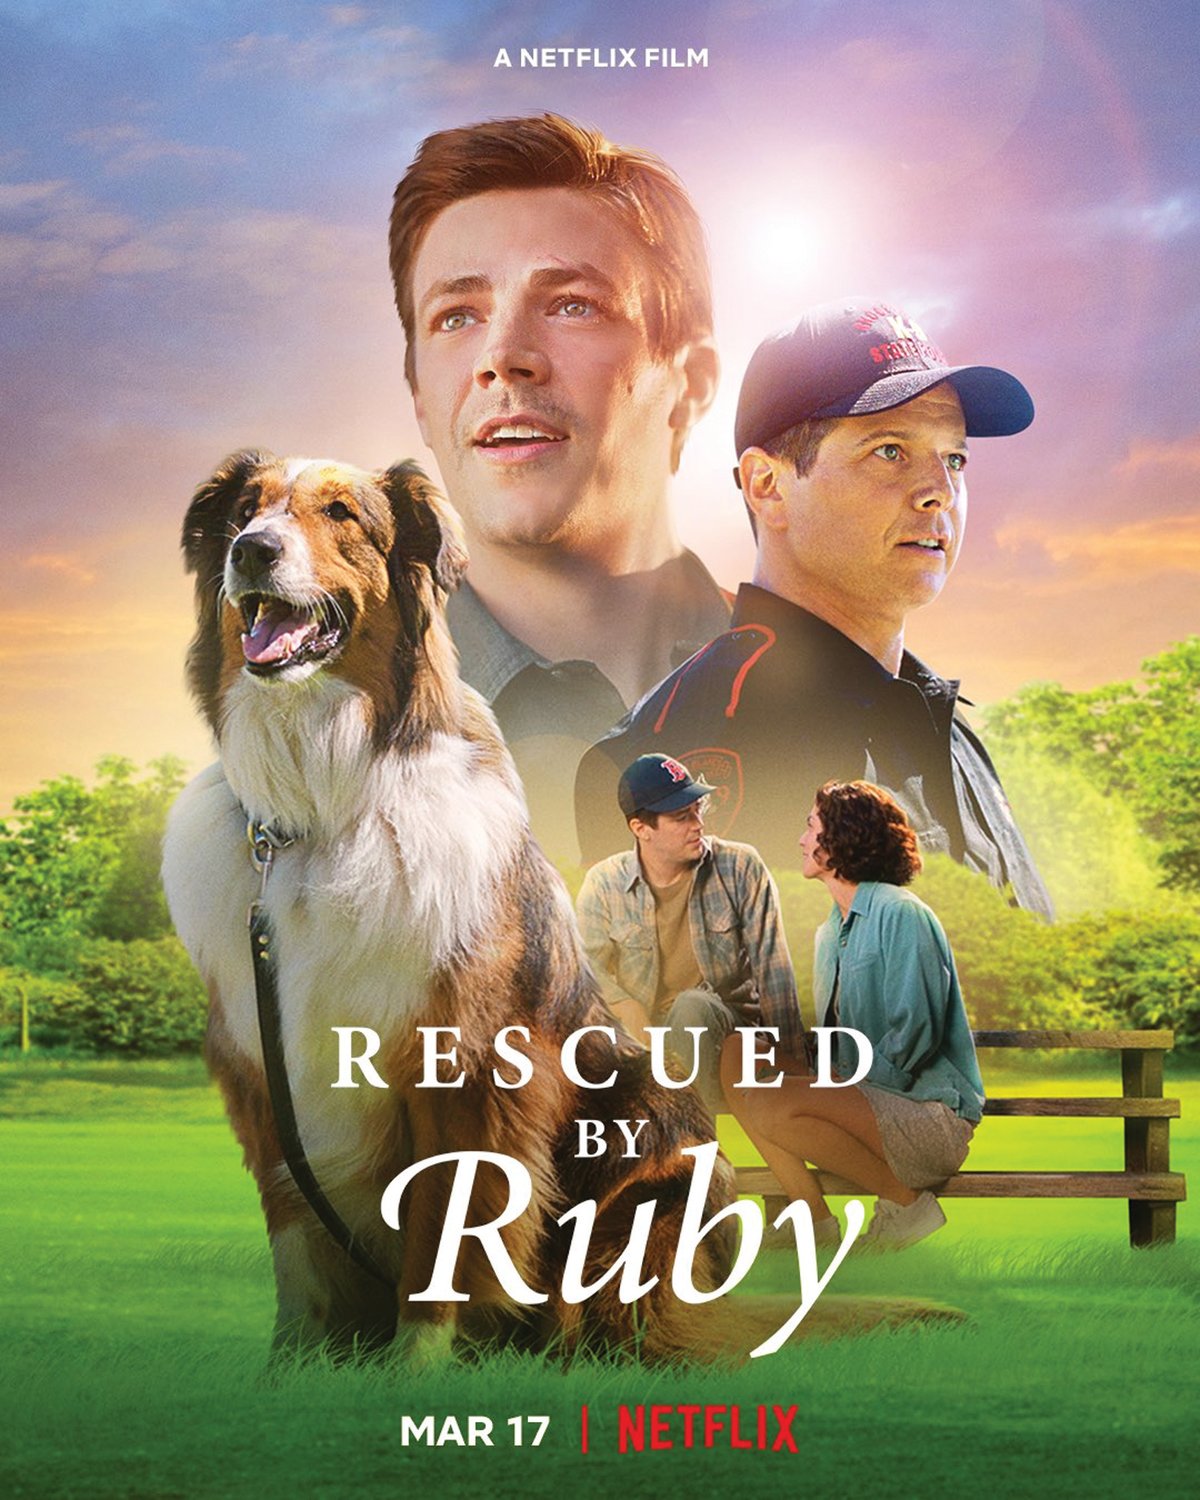 MOVIE STAR MUTT: Ruby’s story was told in the Netflix film “Rescued by Ruby” released earlier this year.